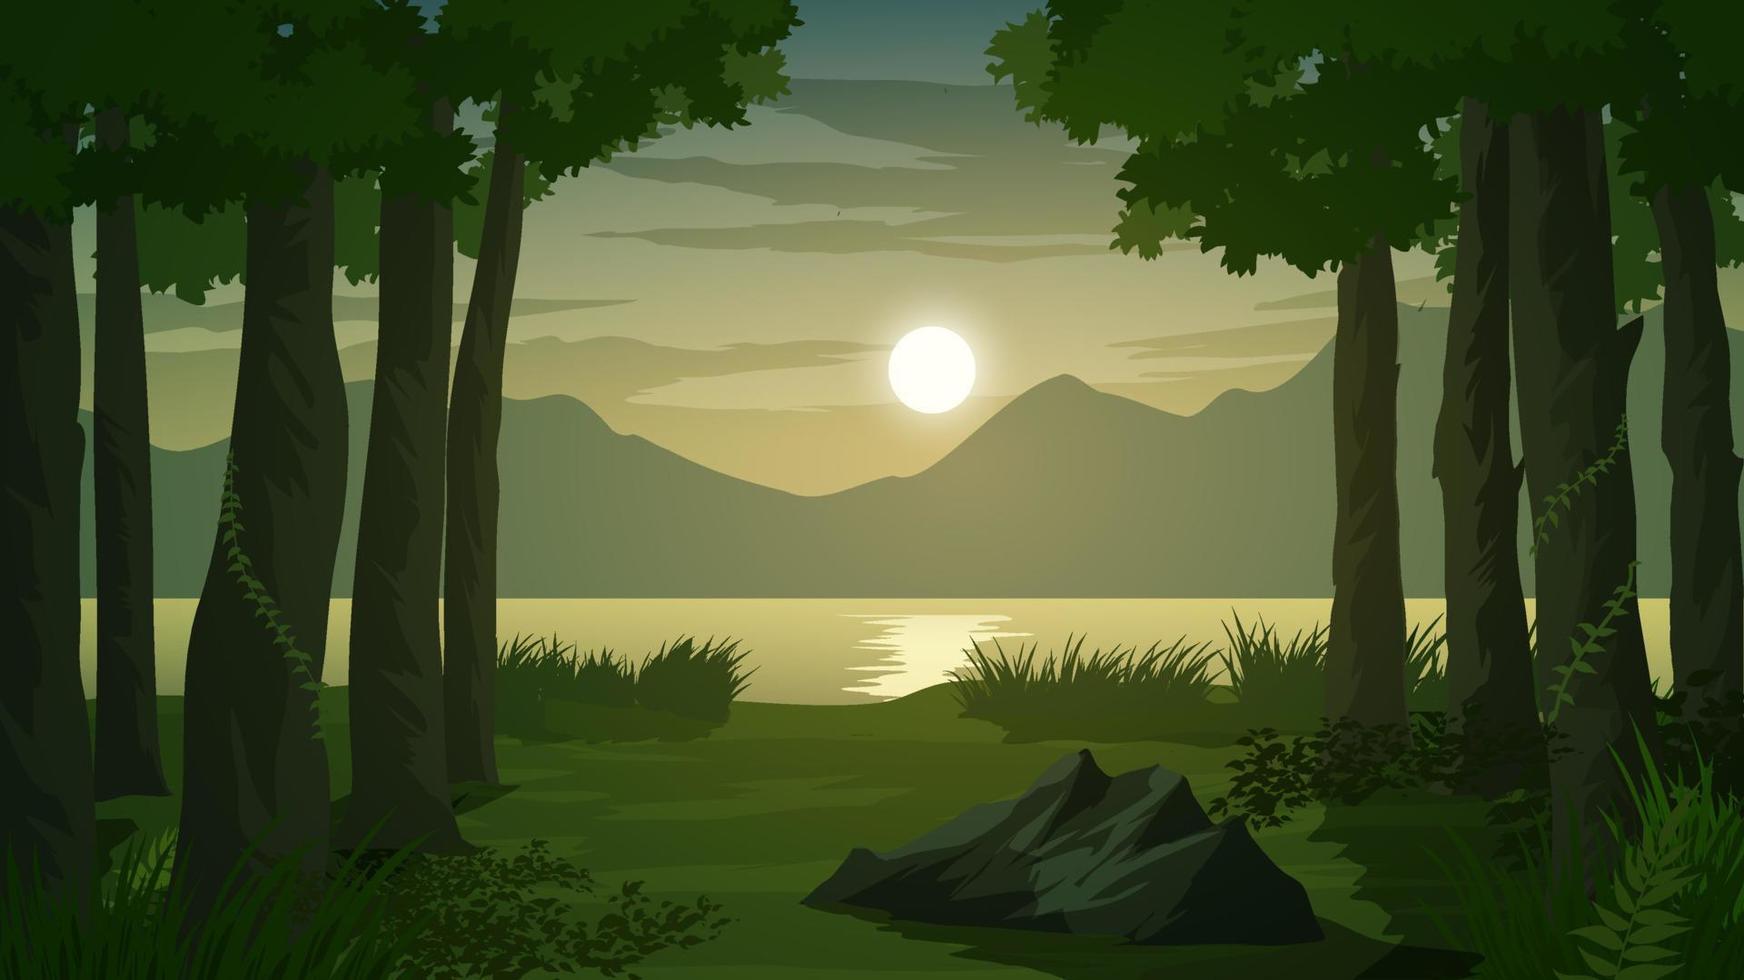 Sunset in forest by lake and mountain vector